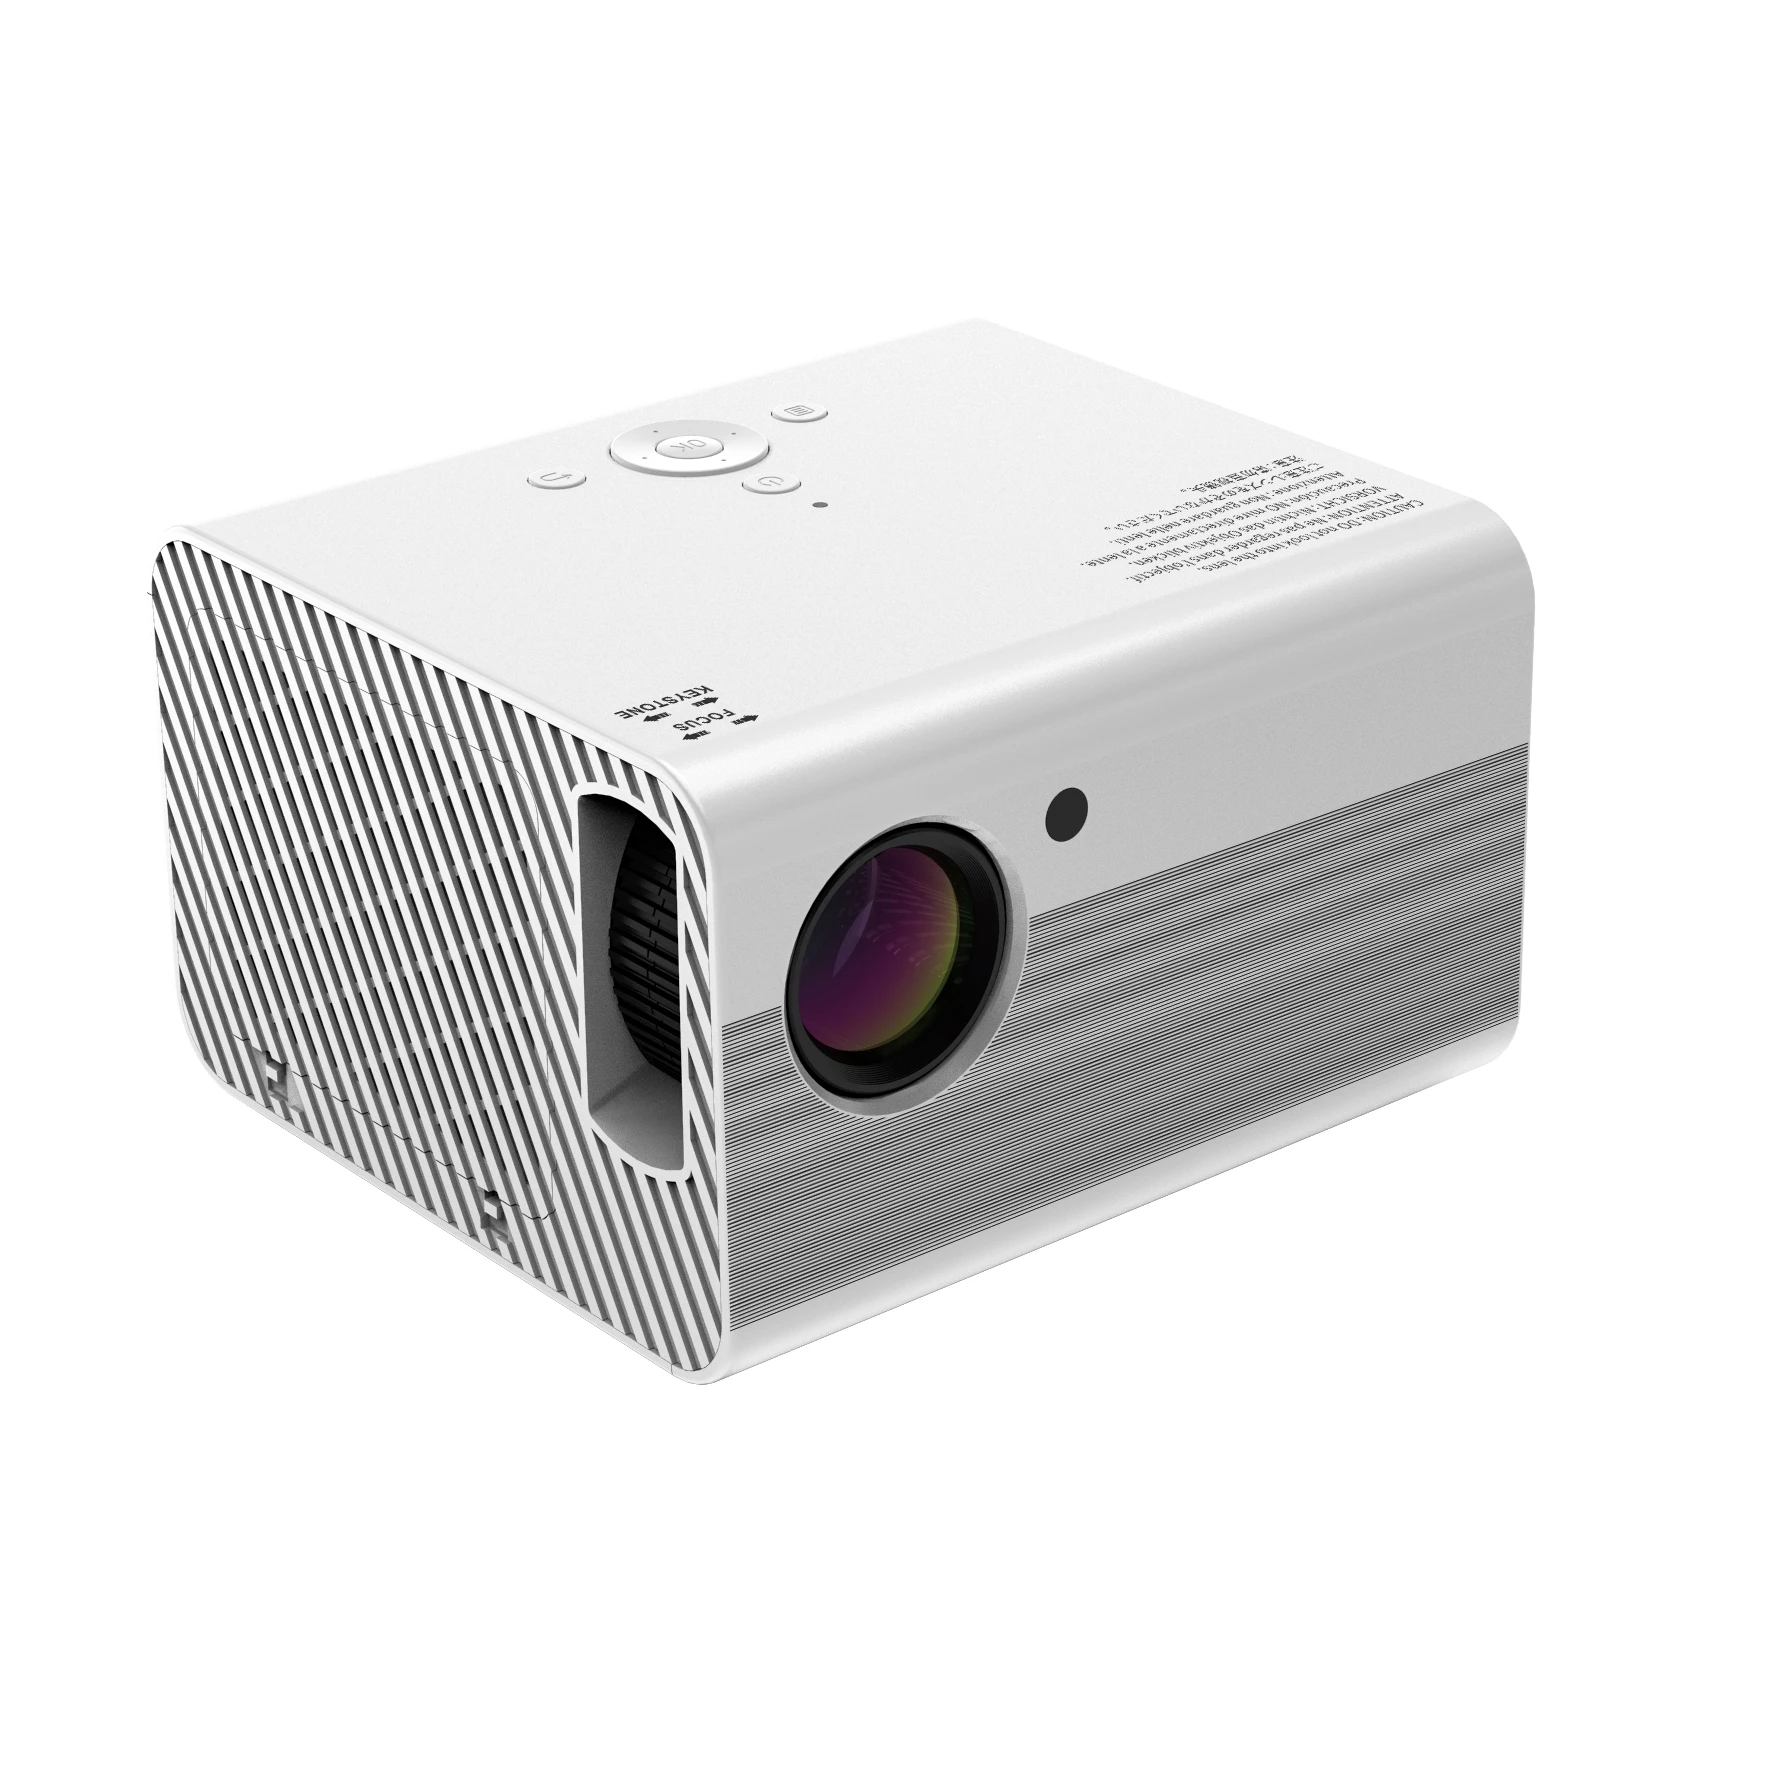 Ingrijpen Namens kin Mini Projector With Battery 4k Lcd Video 1080p Led Home Theater Projector  Mini Beamer 4k Best Small High Quality Projector - Buy Mini Beamer 4k,Mini  Projector 4k,Projector Phone Product on Alibaba.com